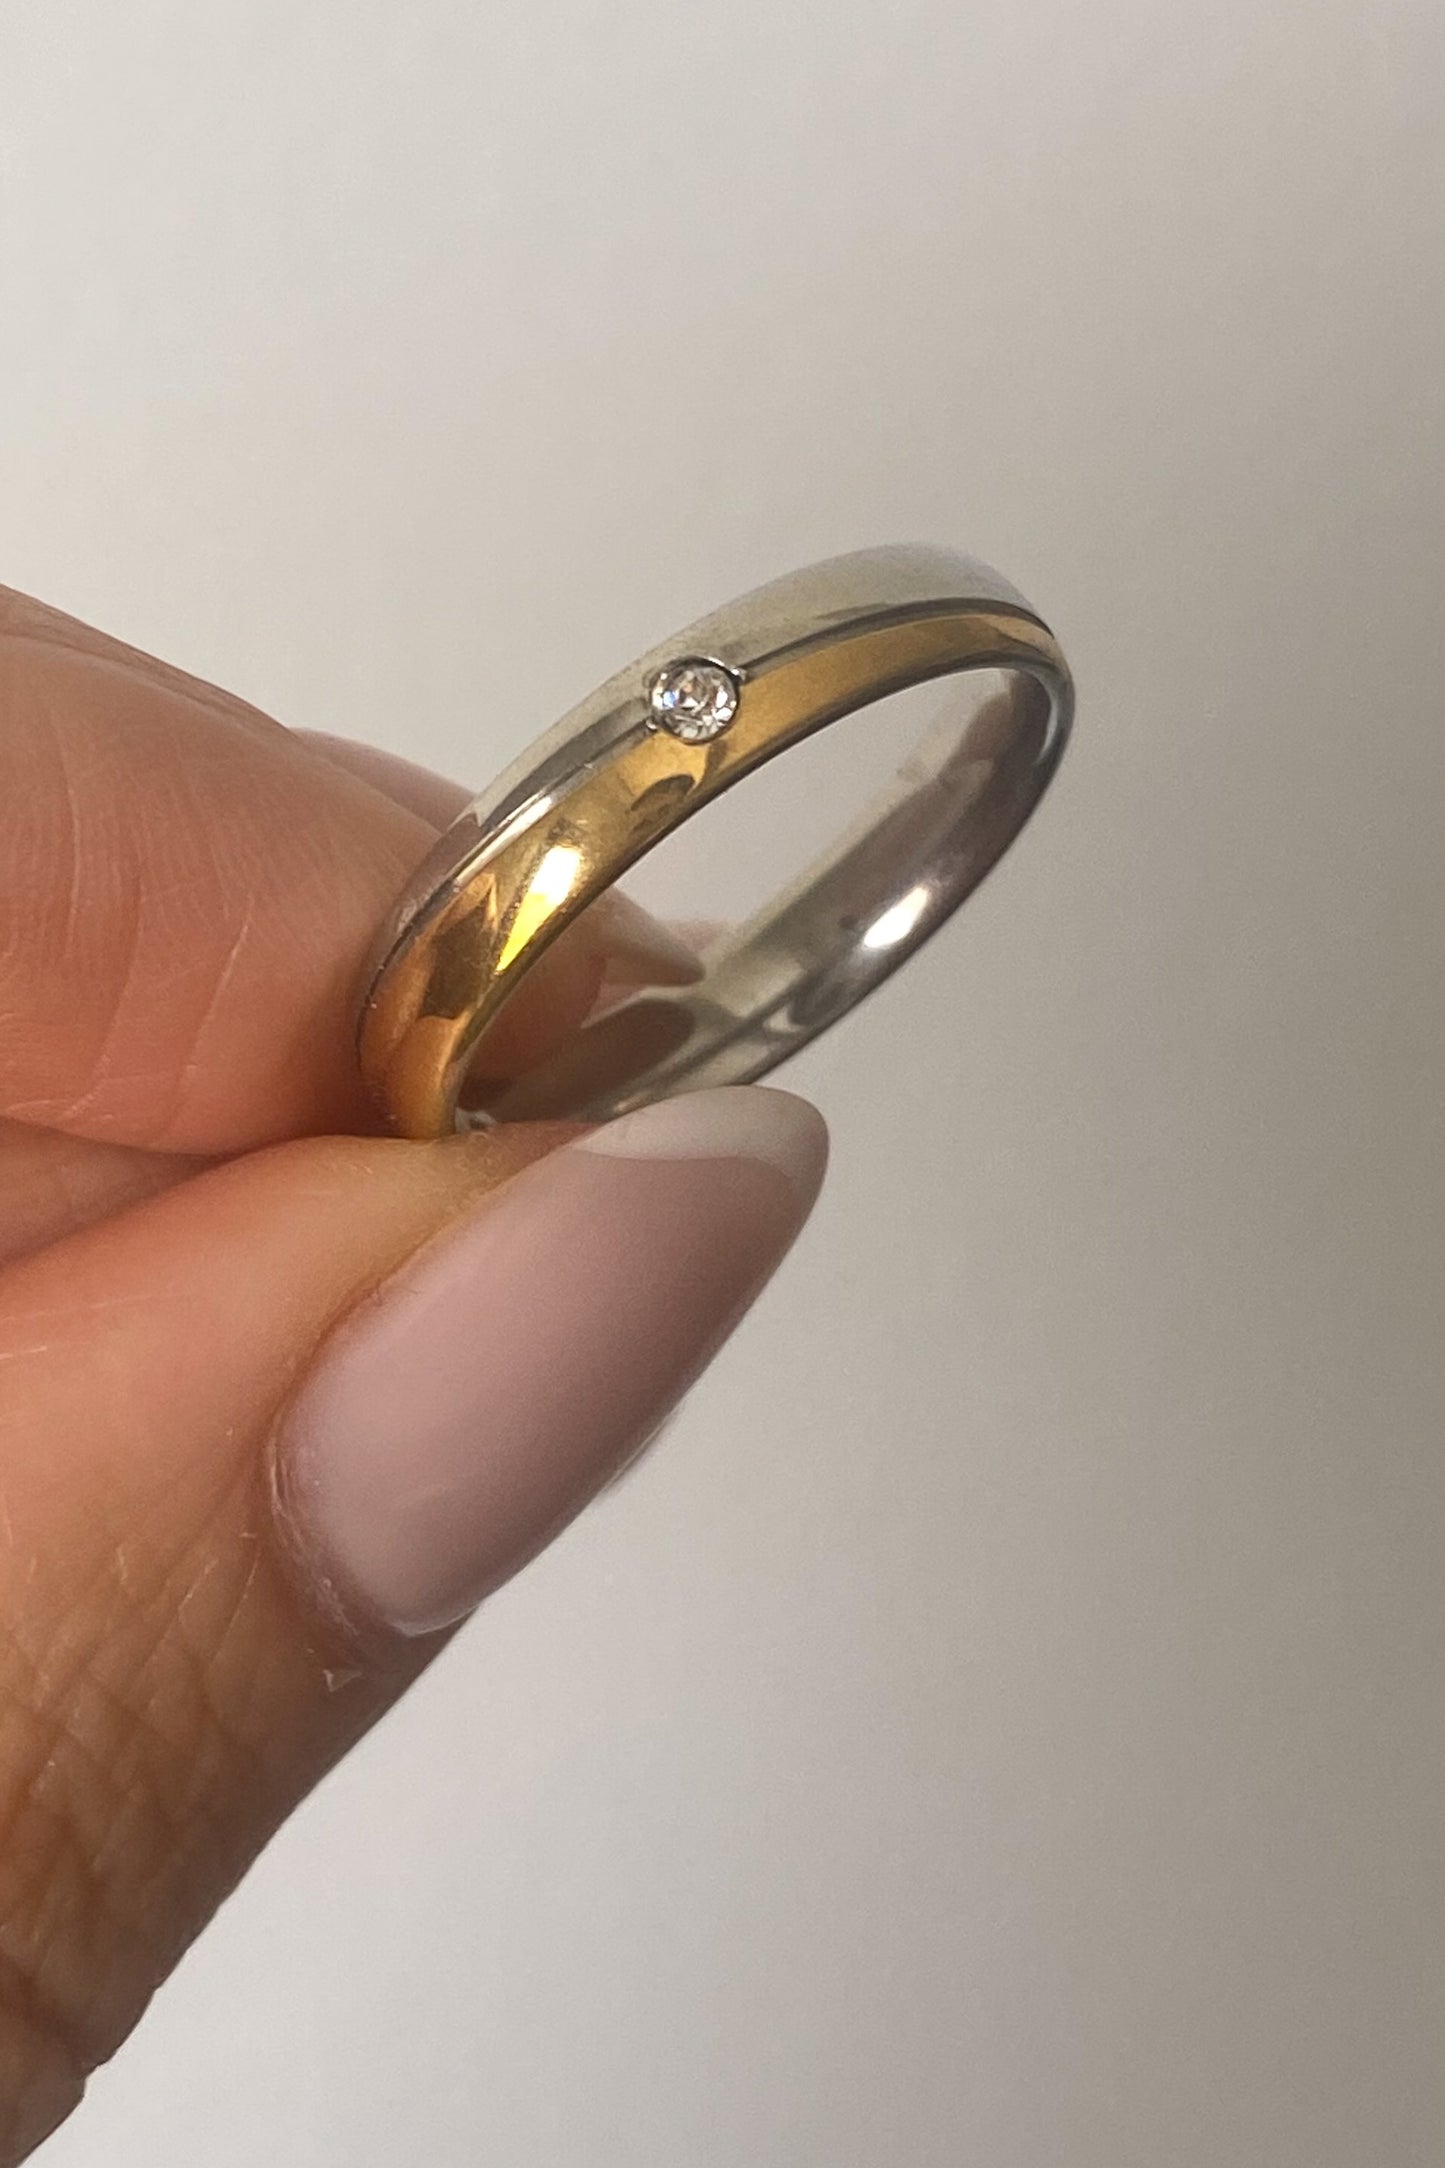 Ring / Wedding Ring - Size 9, 10 and 11 - Promotion 03-24 to 04-24